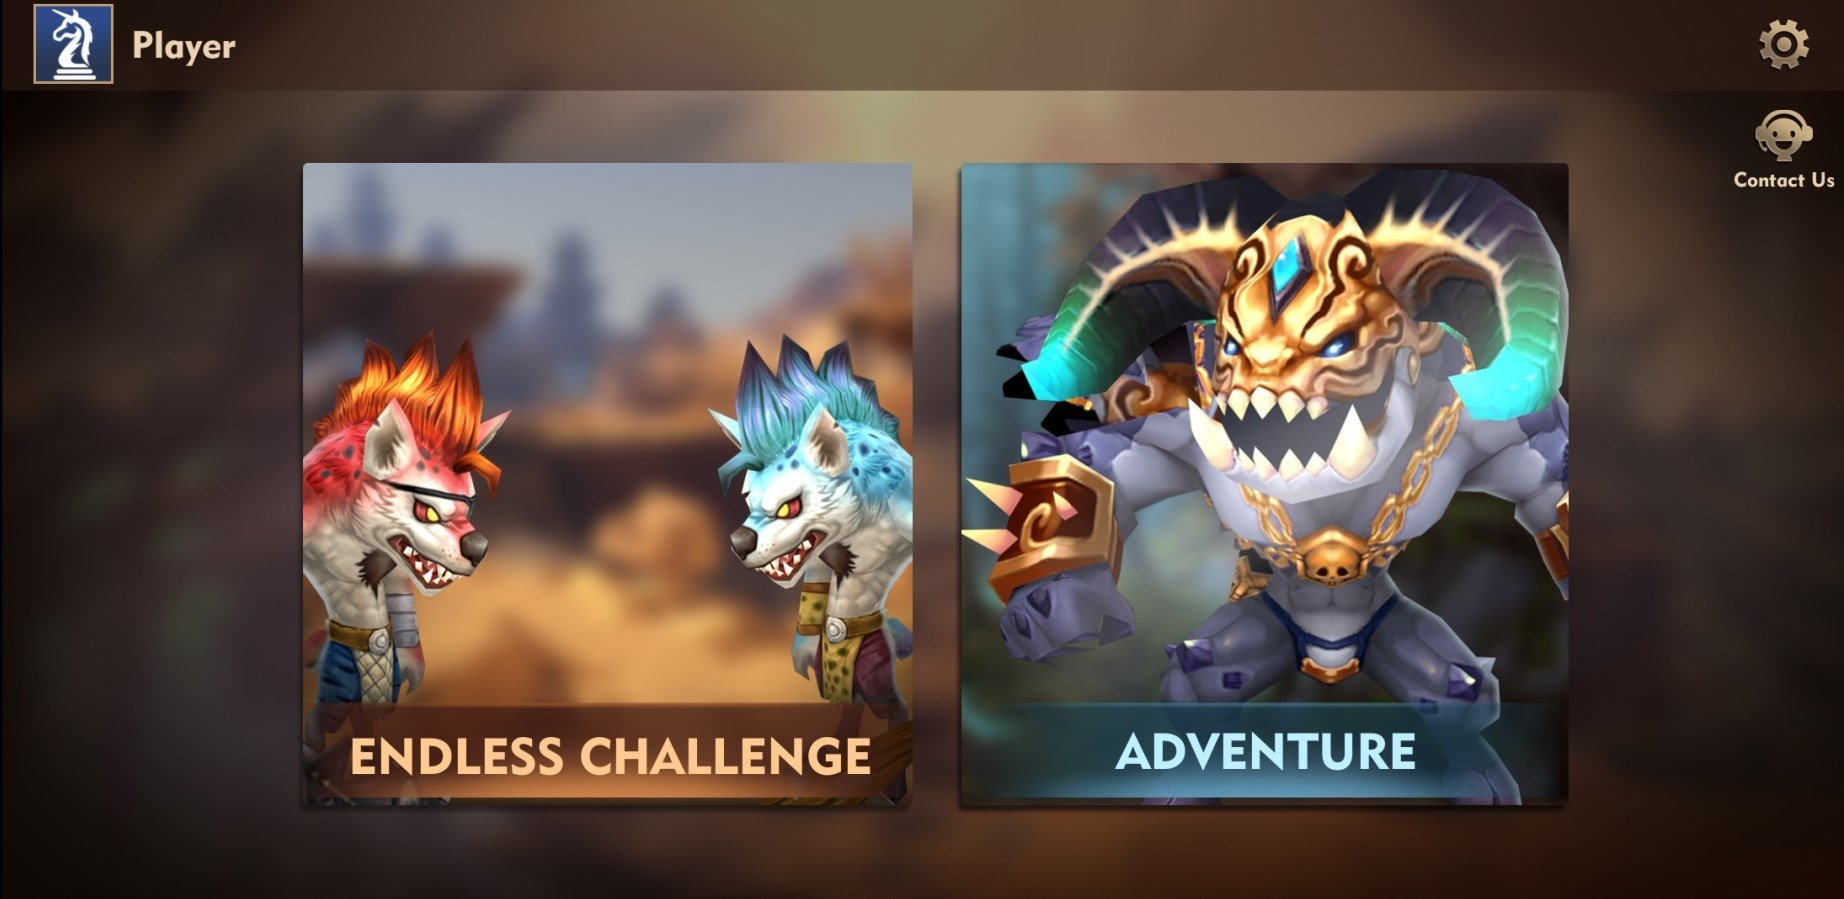 Heroes Auto Chess APK Download for Android Free